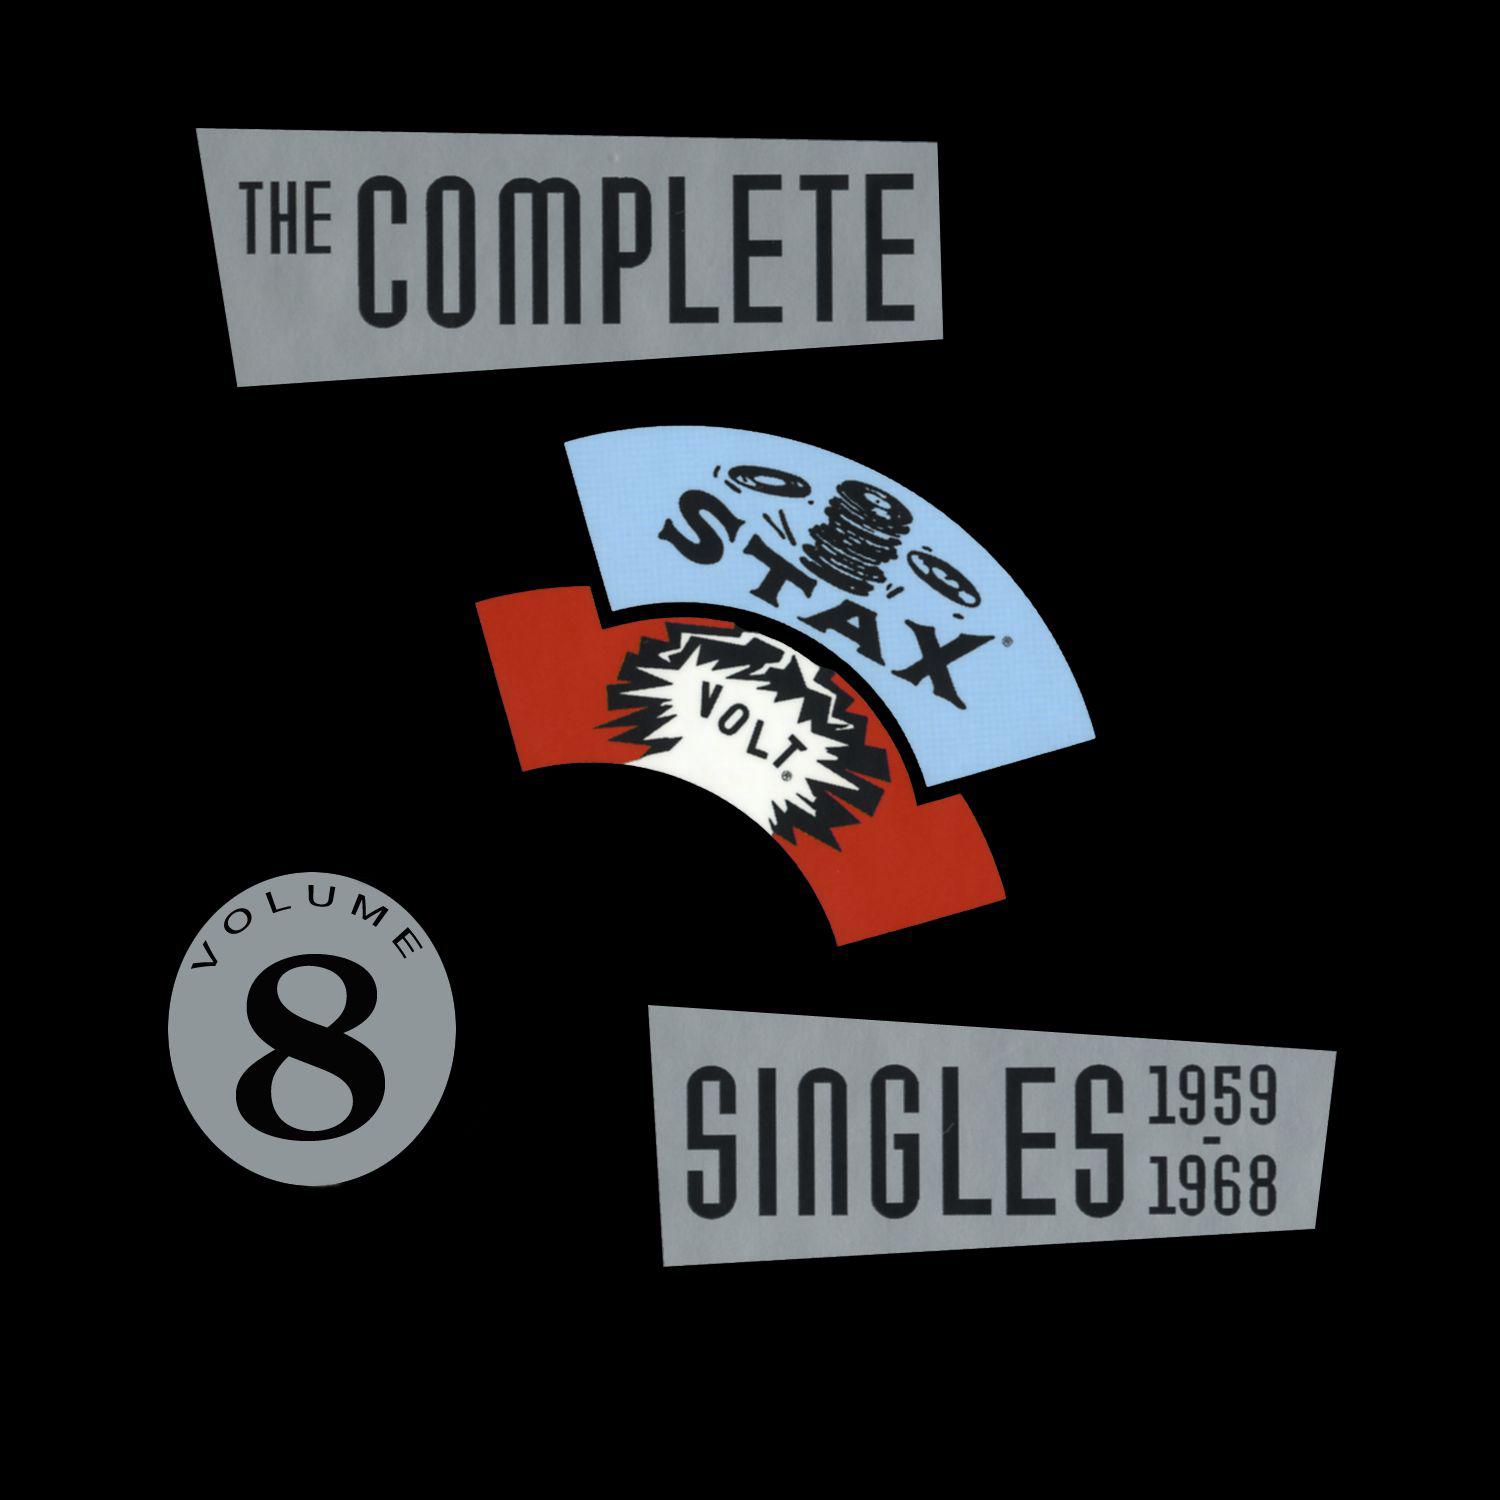 Stax/Volt - The Complete Singles 1959-1968 - Volume 8